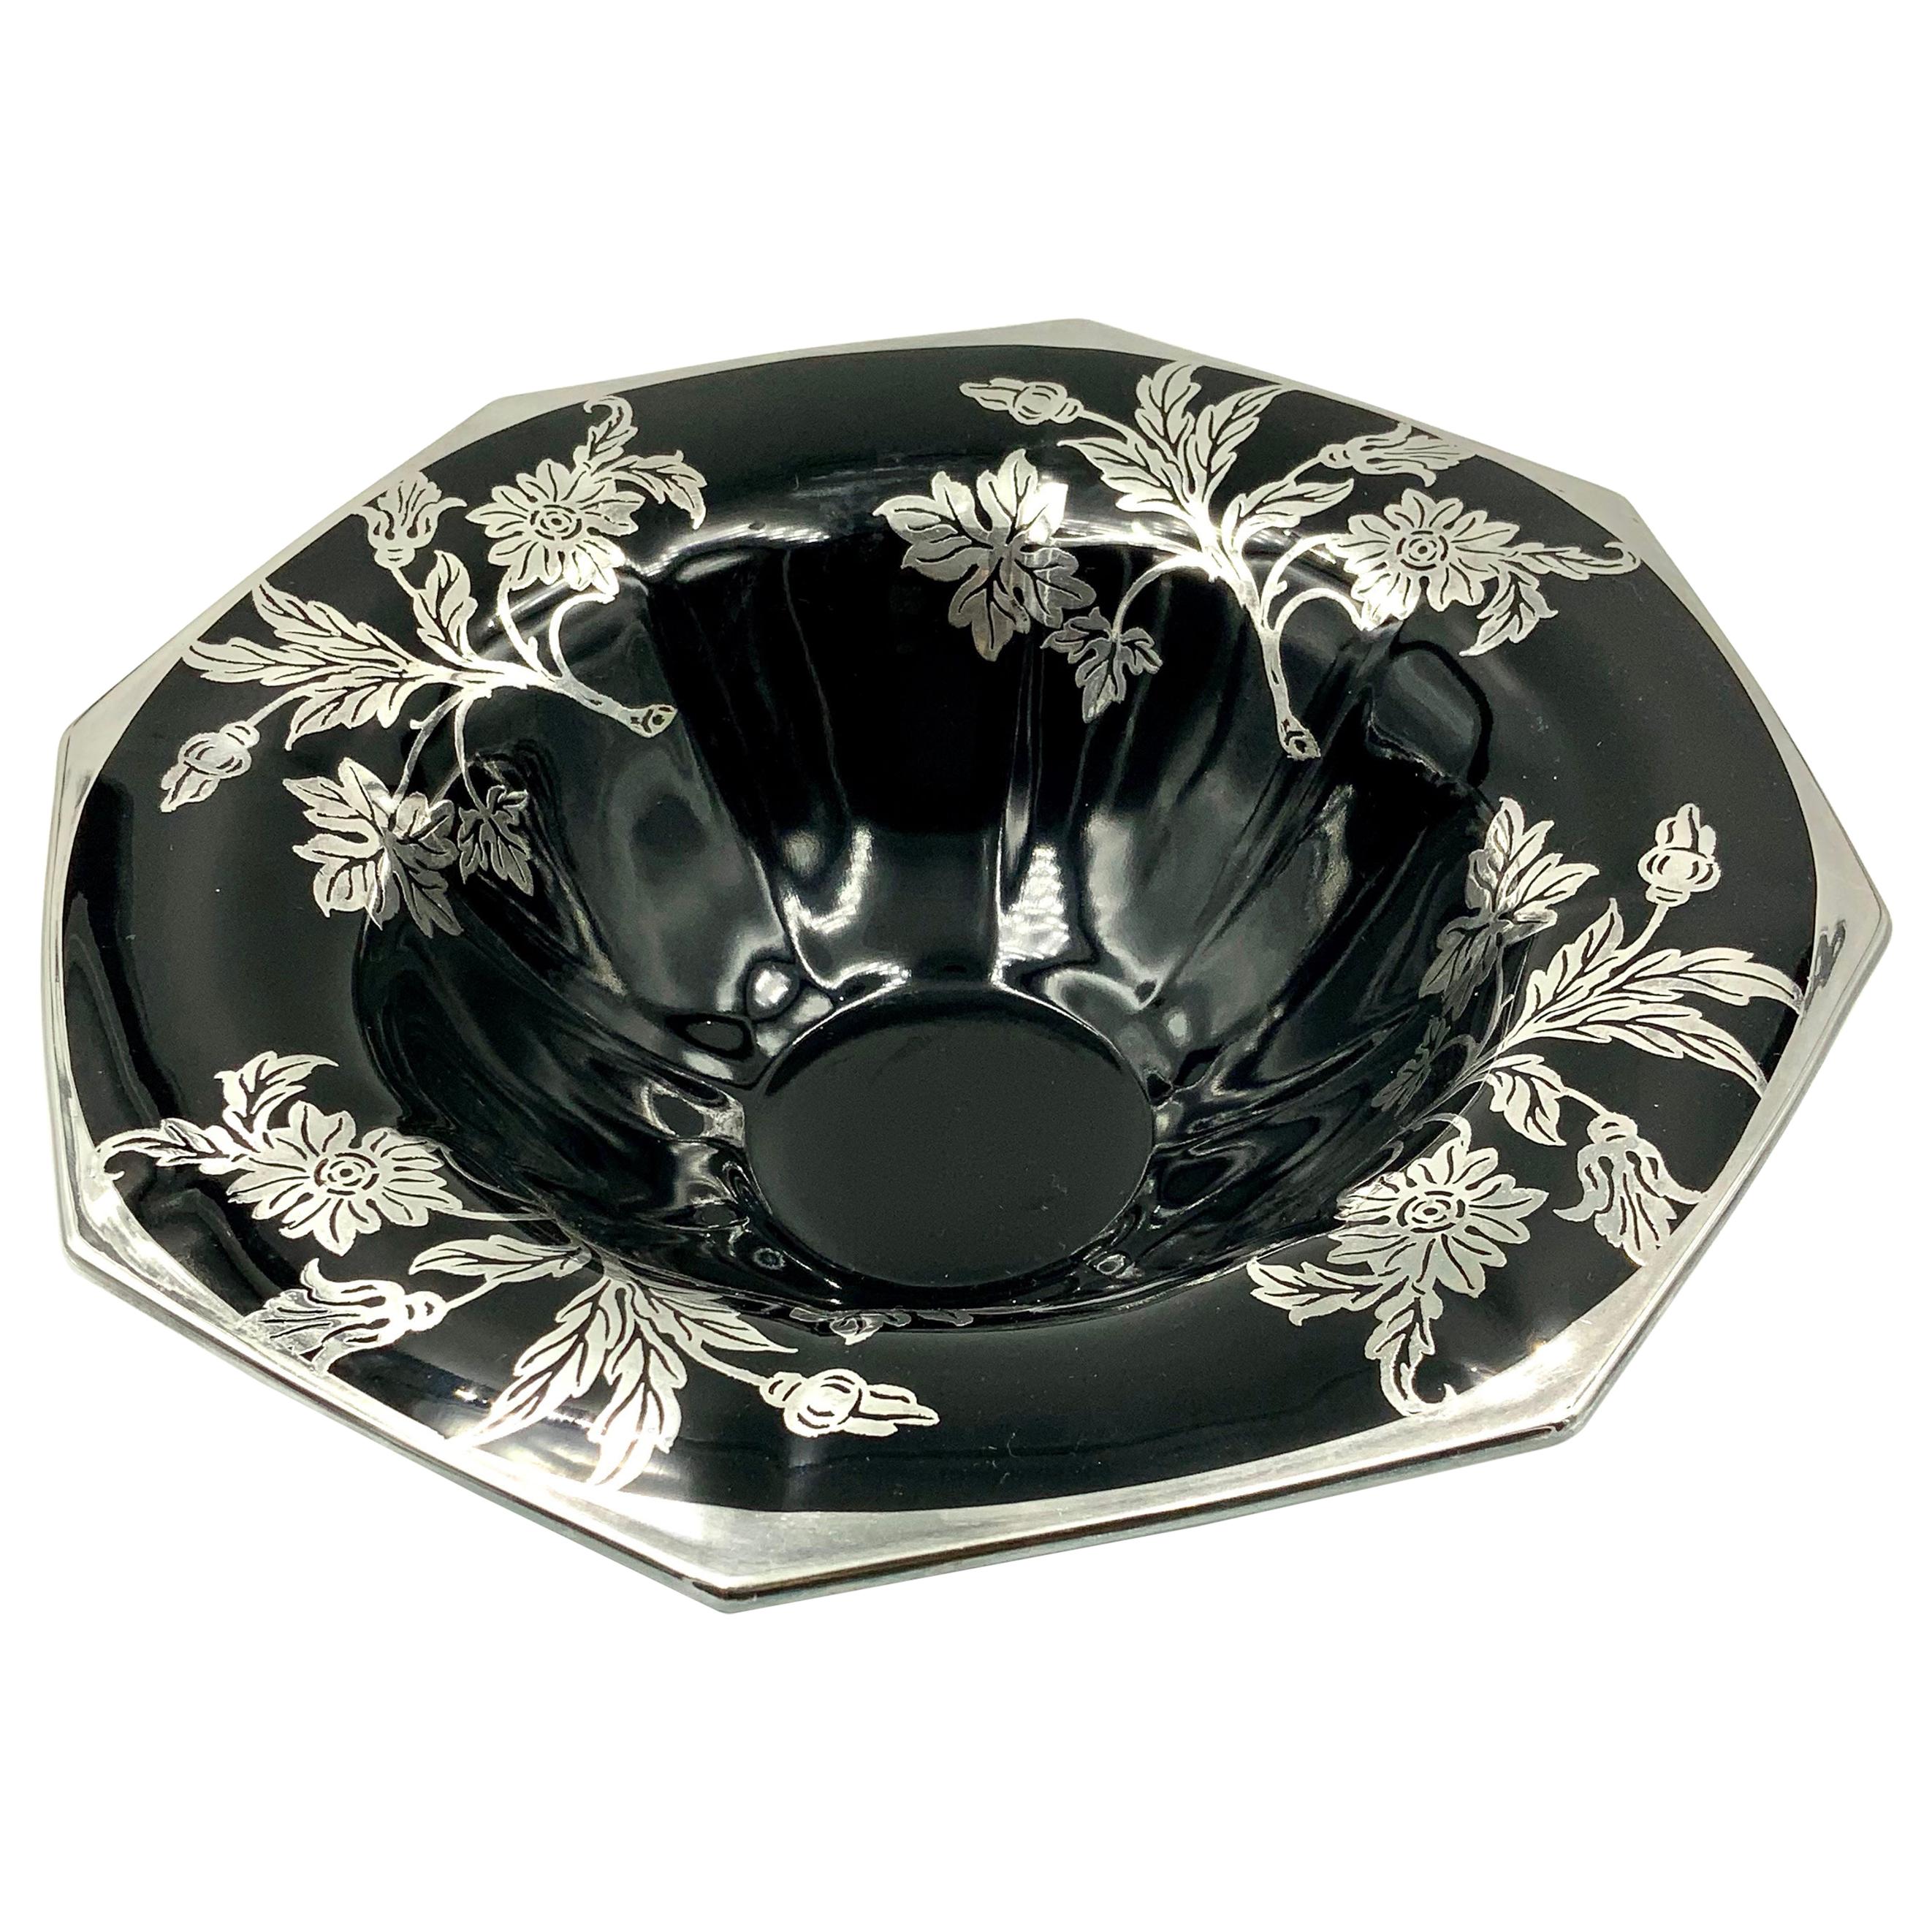 Flower and Leaf Silver Overlay Black Glass Octagonal Footed Bowl